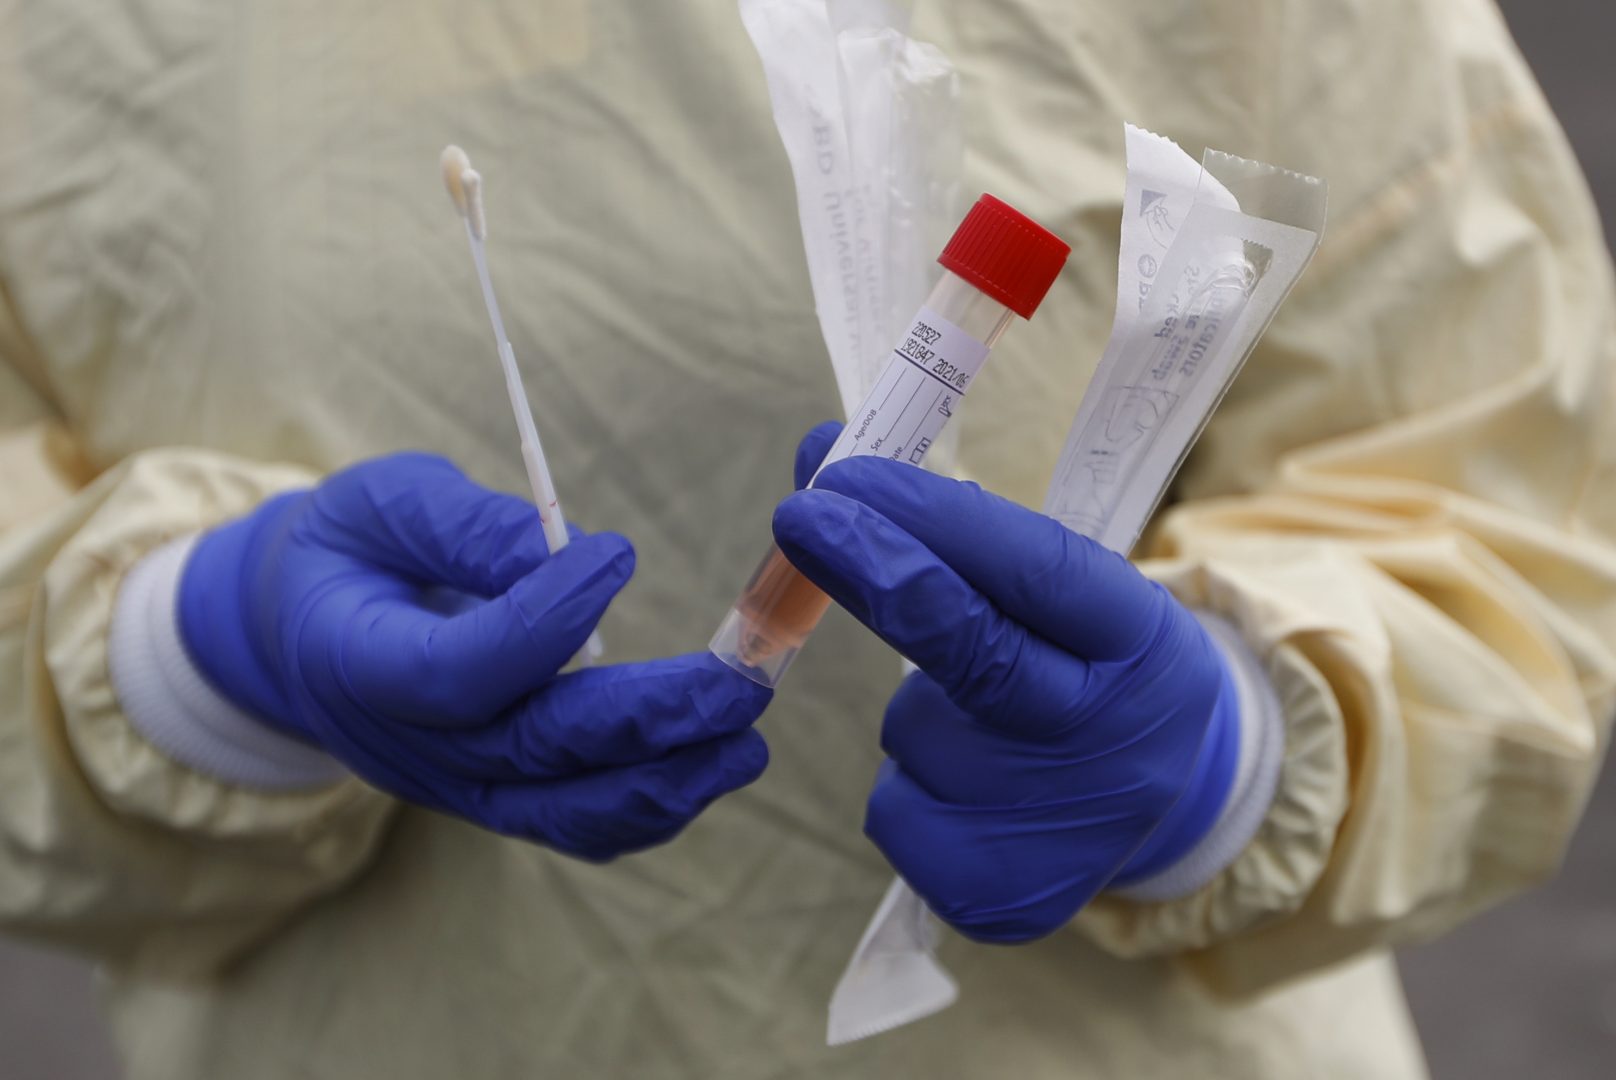 A nurse holds swabs and test tube to test people for COVID-19 at a drive through station set up in the parking lot of the Beaumont Hospital in Royal Oak, Mich., Monday, March 16, 2020.